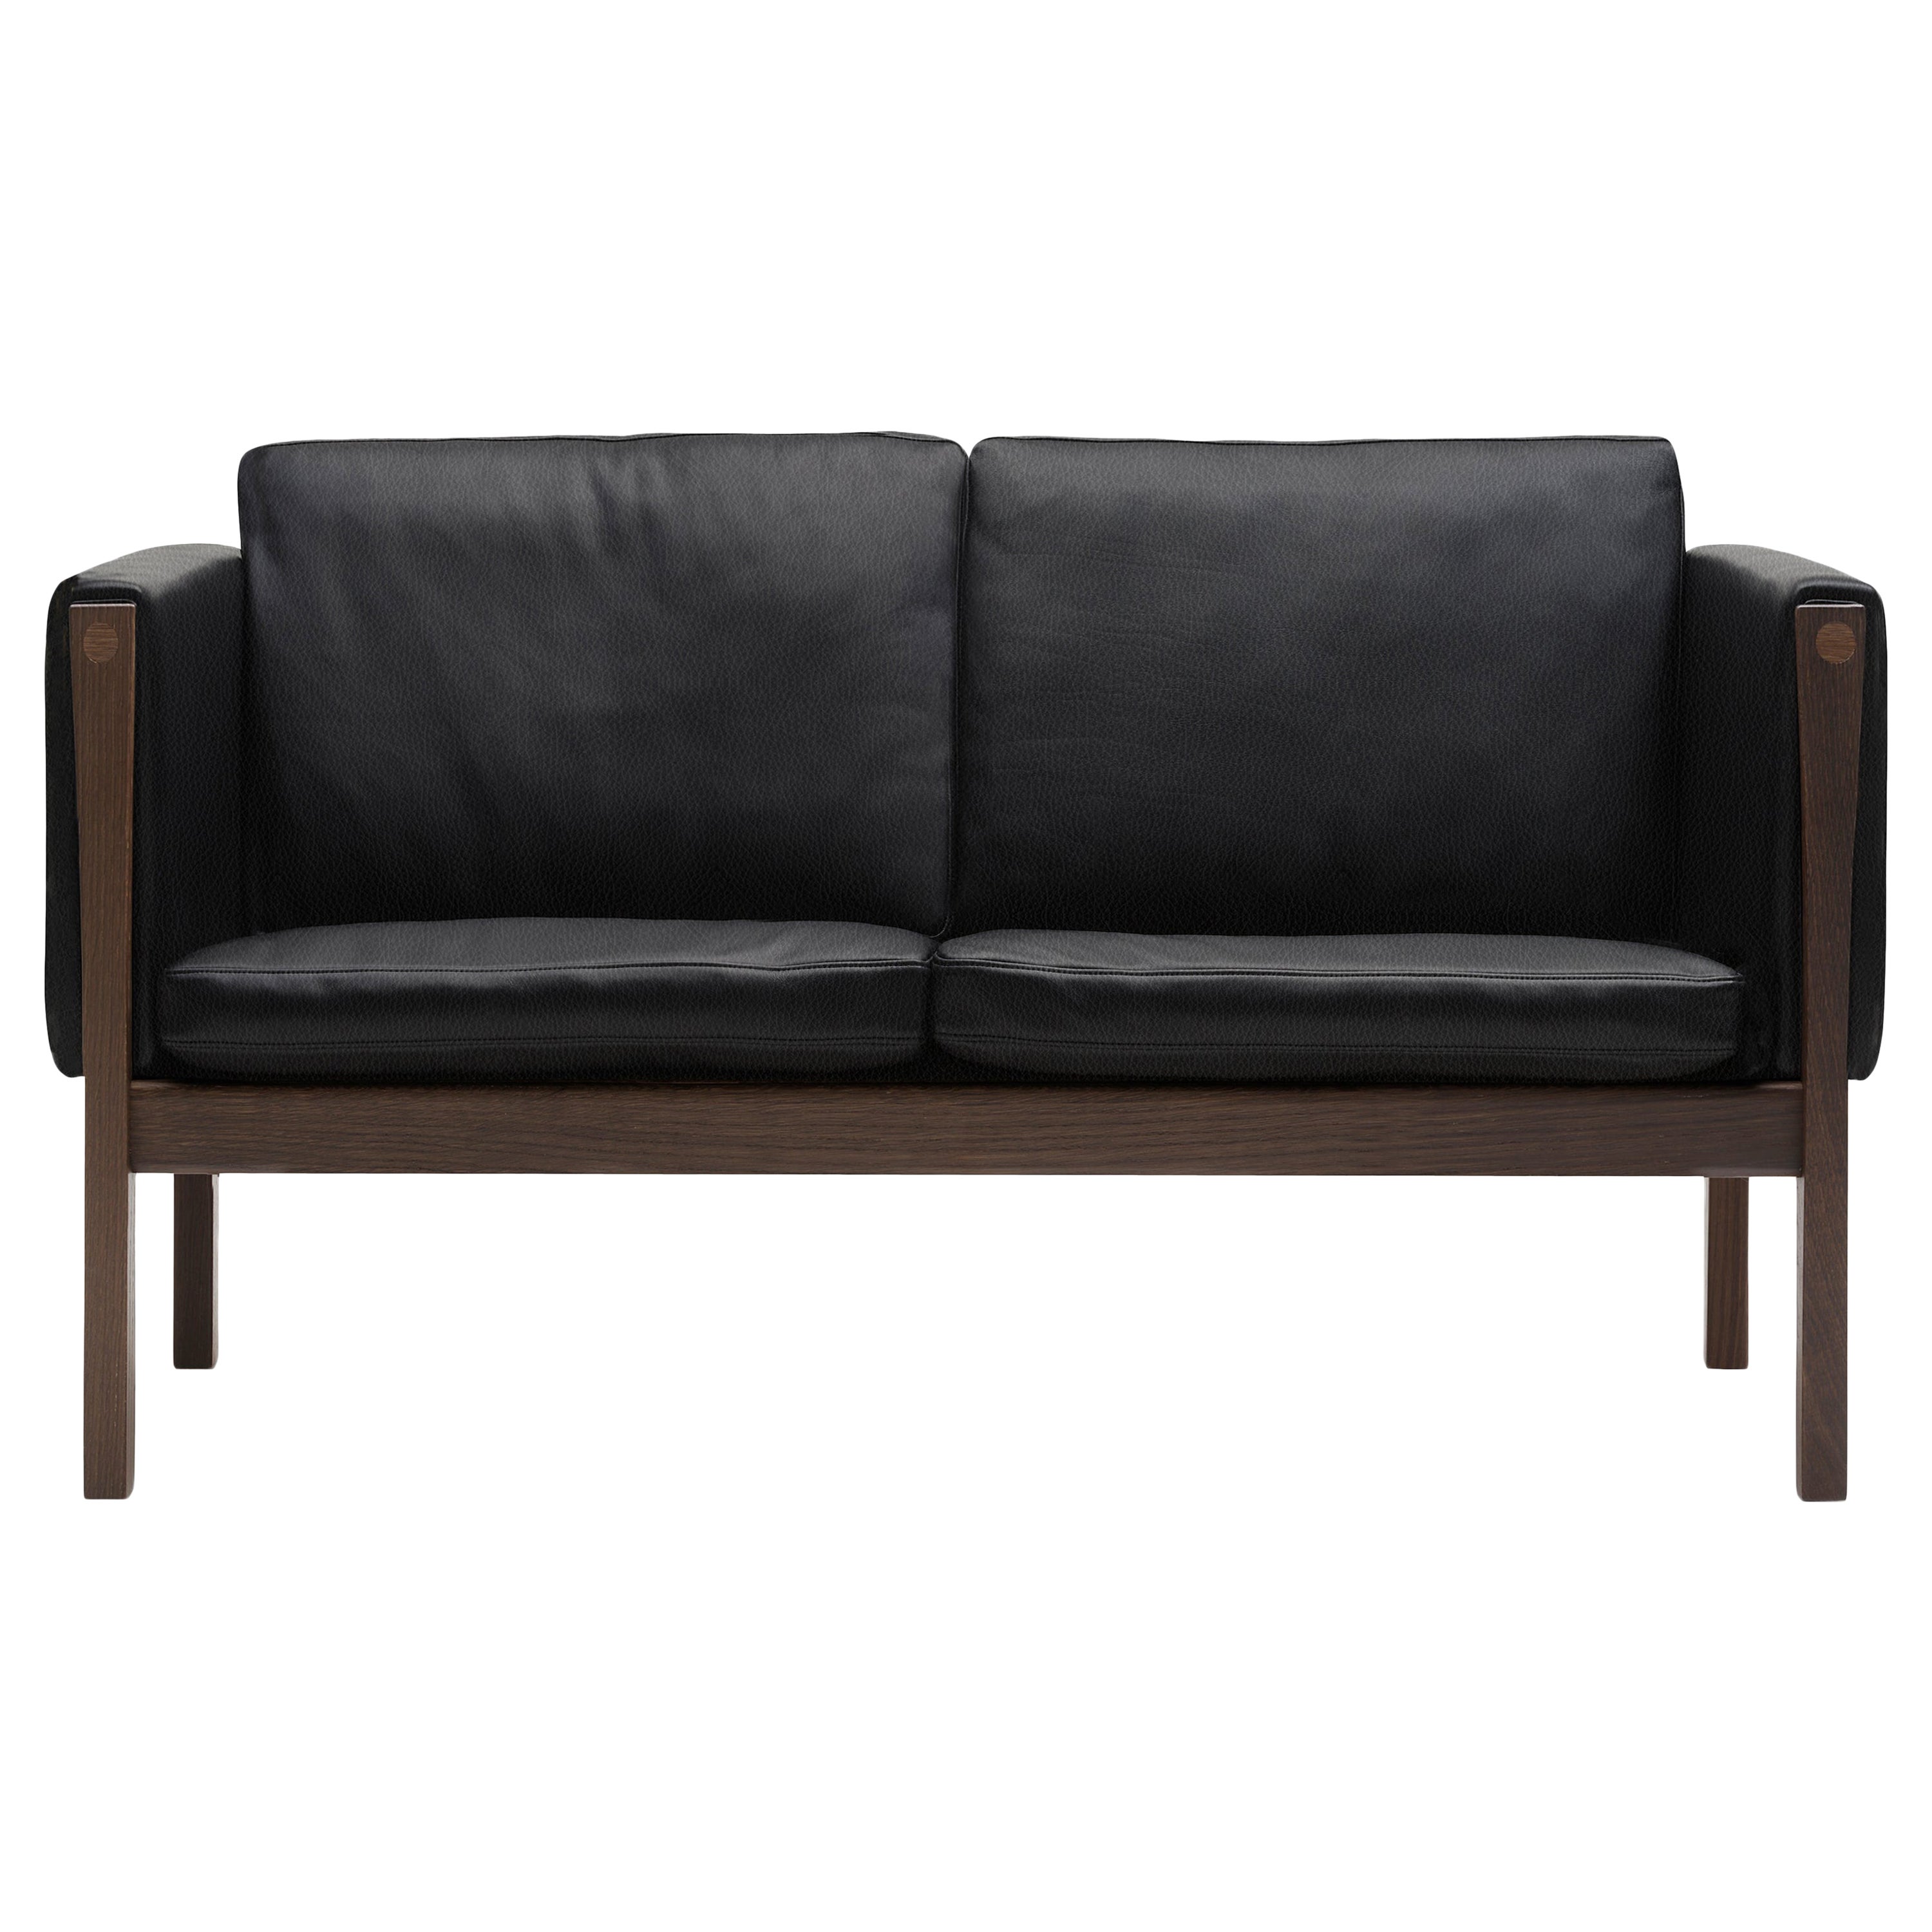 CH162 Sofa in Walnut Oil Frame with Leather Upholstery by Hans J. Wegner